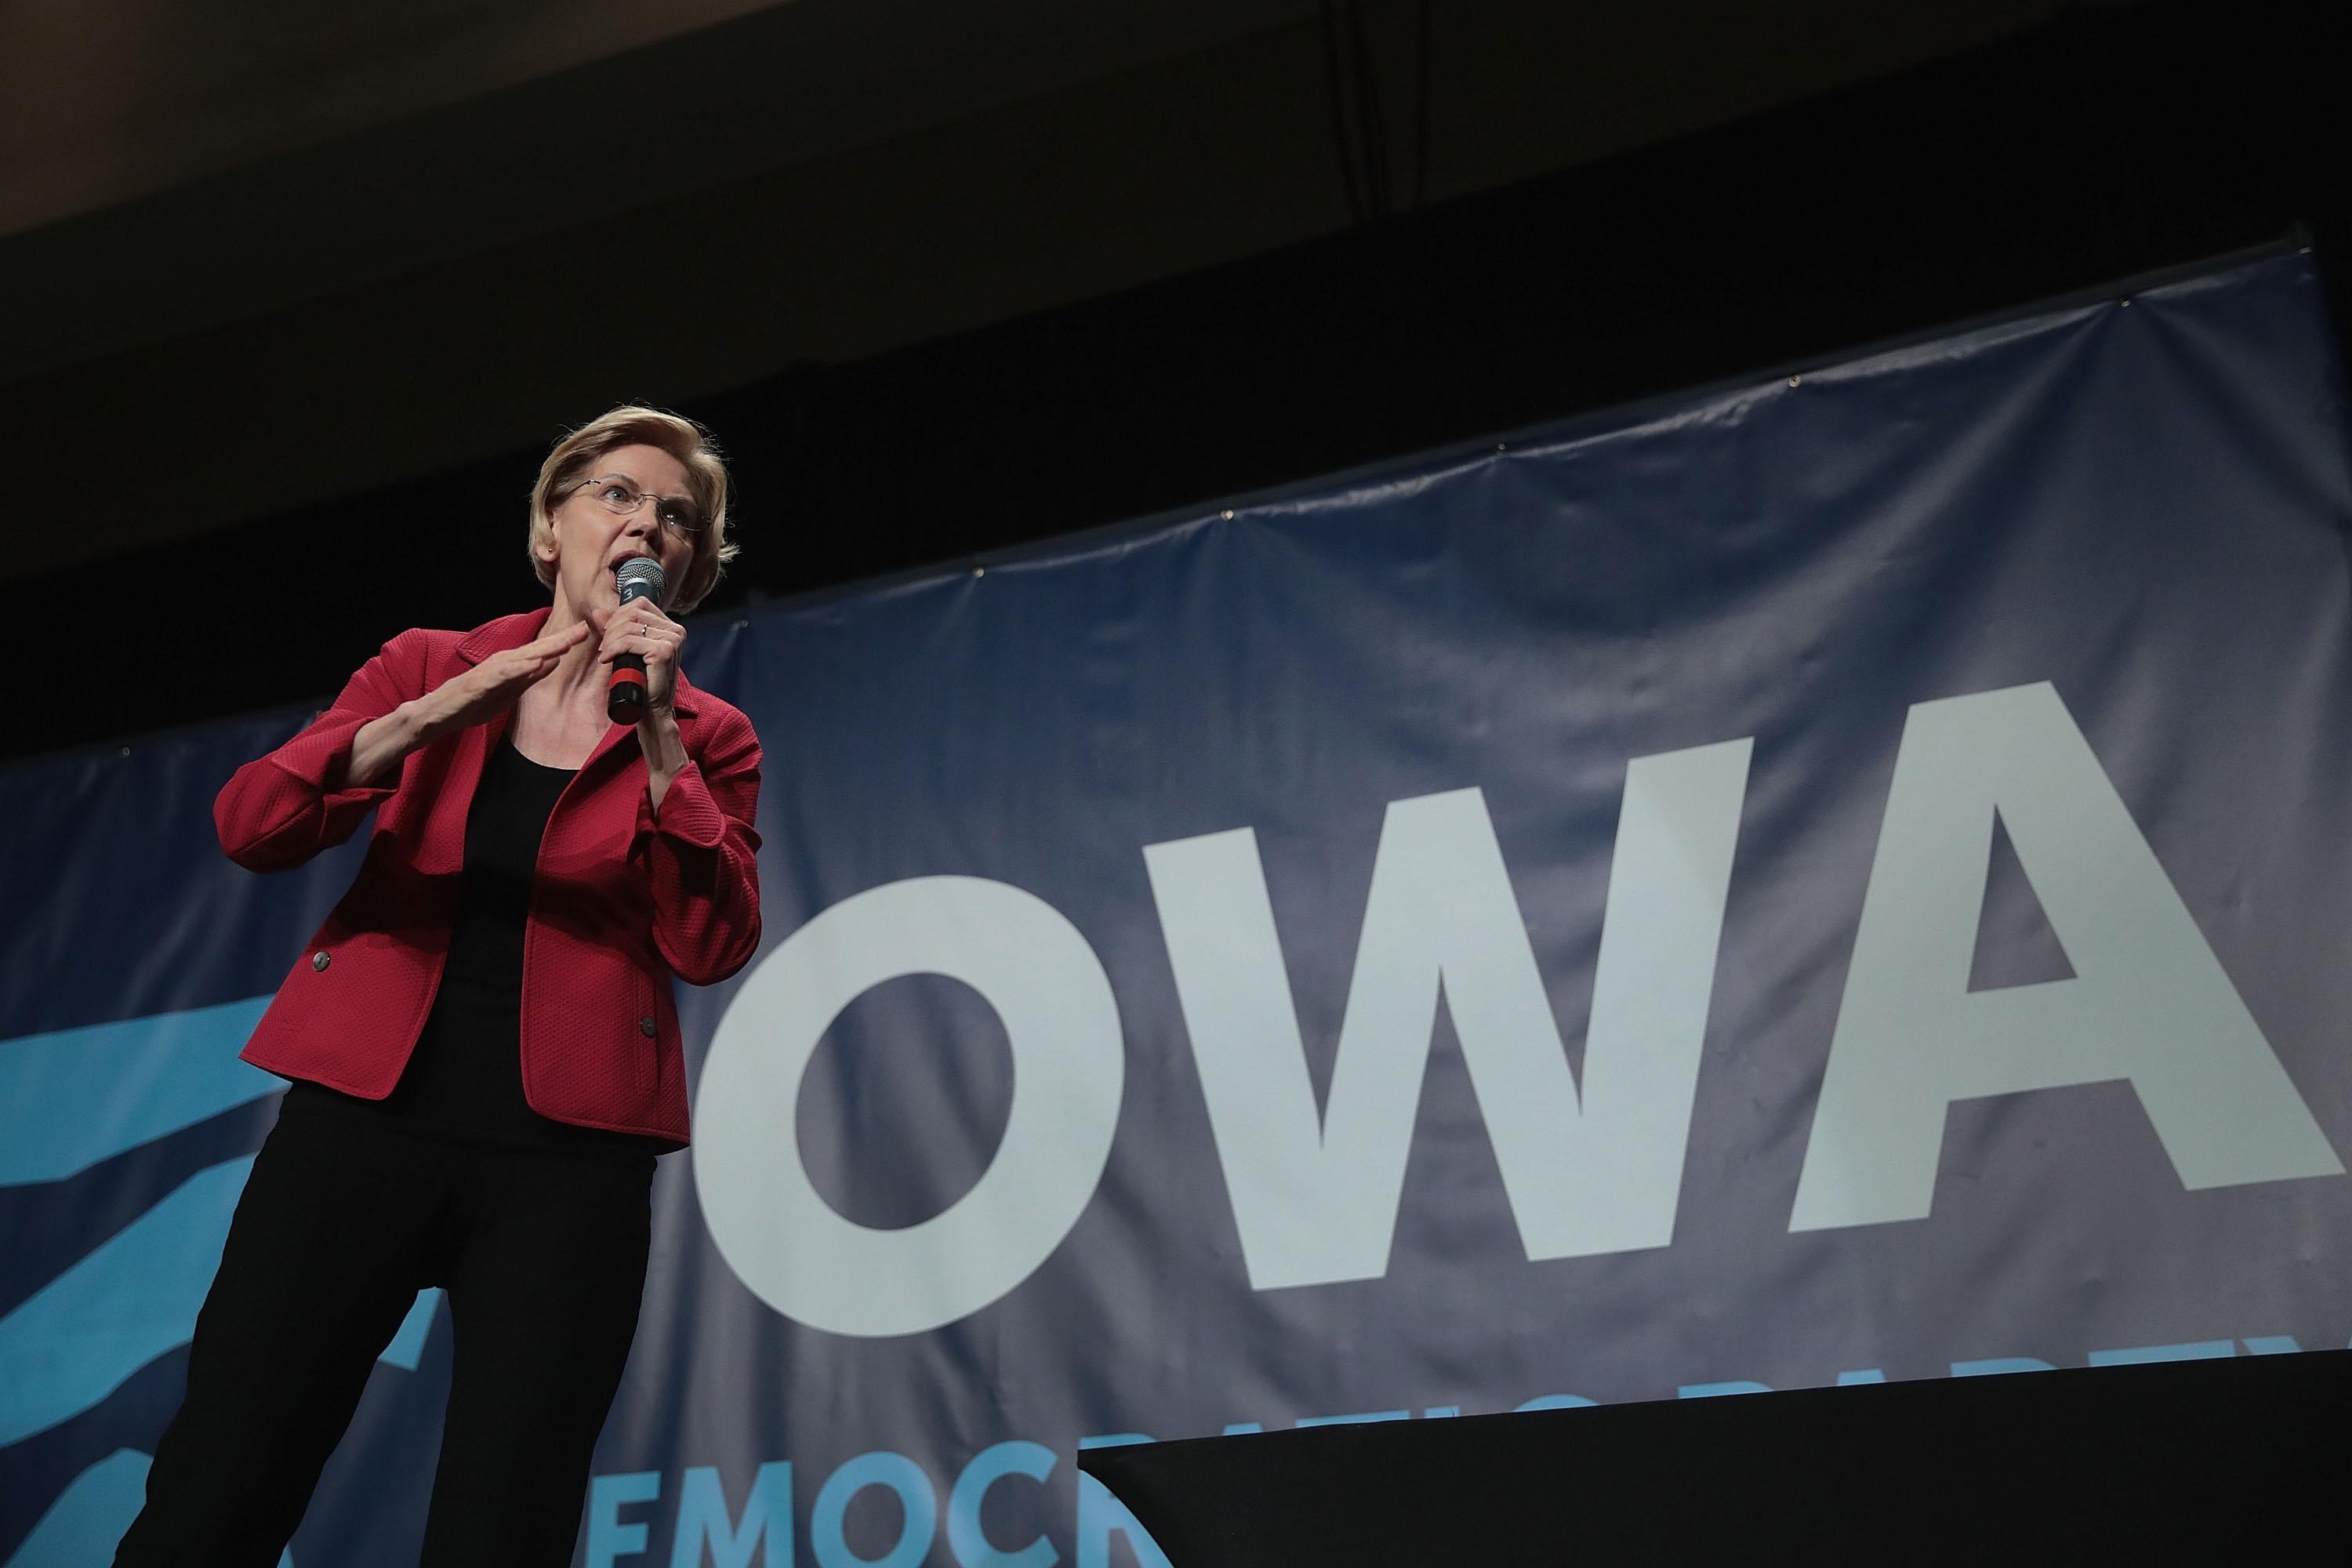 Elizabeth Warren holding and speaking into a mic onstage, campaigning in Cedar Rapids, Iowa.